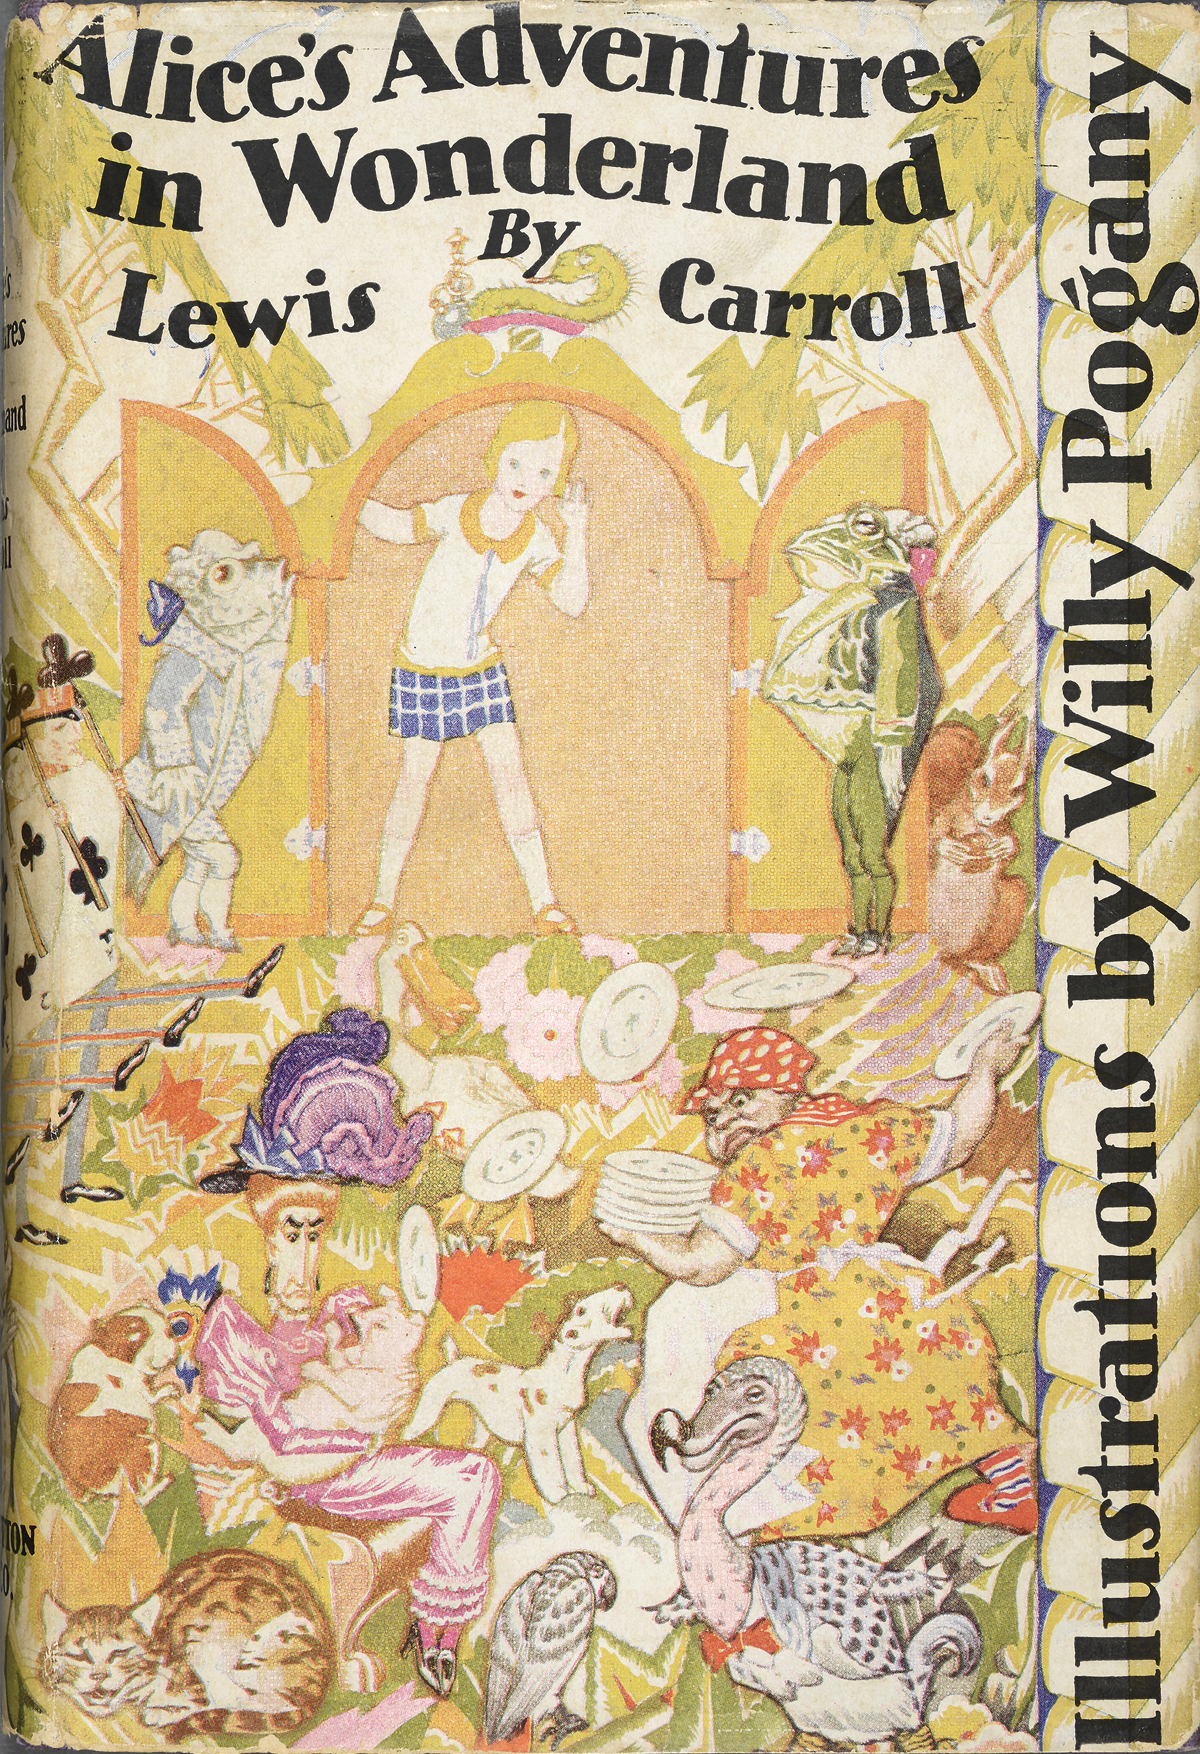 Cover of 1929 edition Lewis Carroll's "Alice's Adventures in Wonderland," illustrated by Willy Pogany.